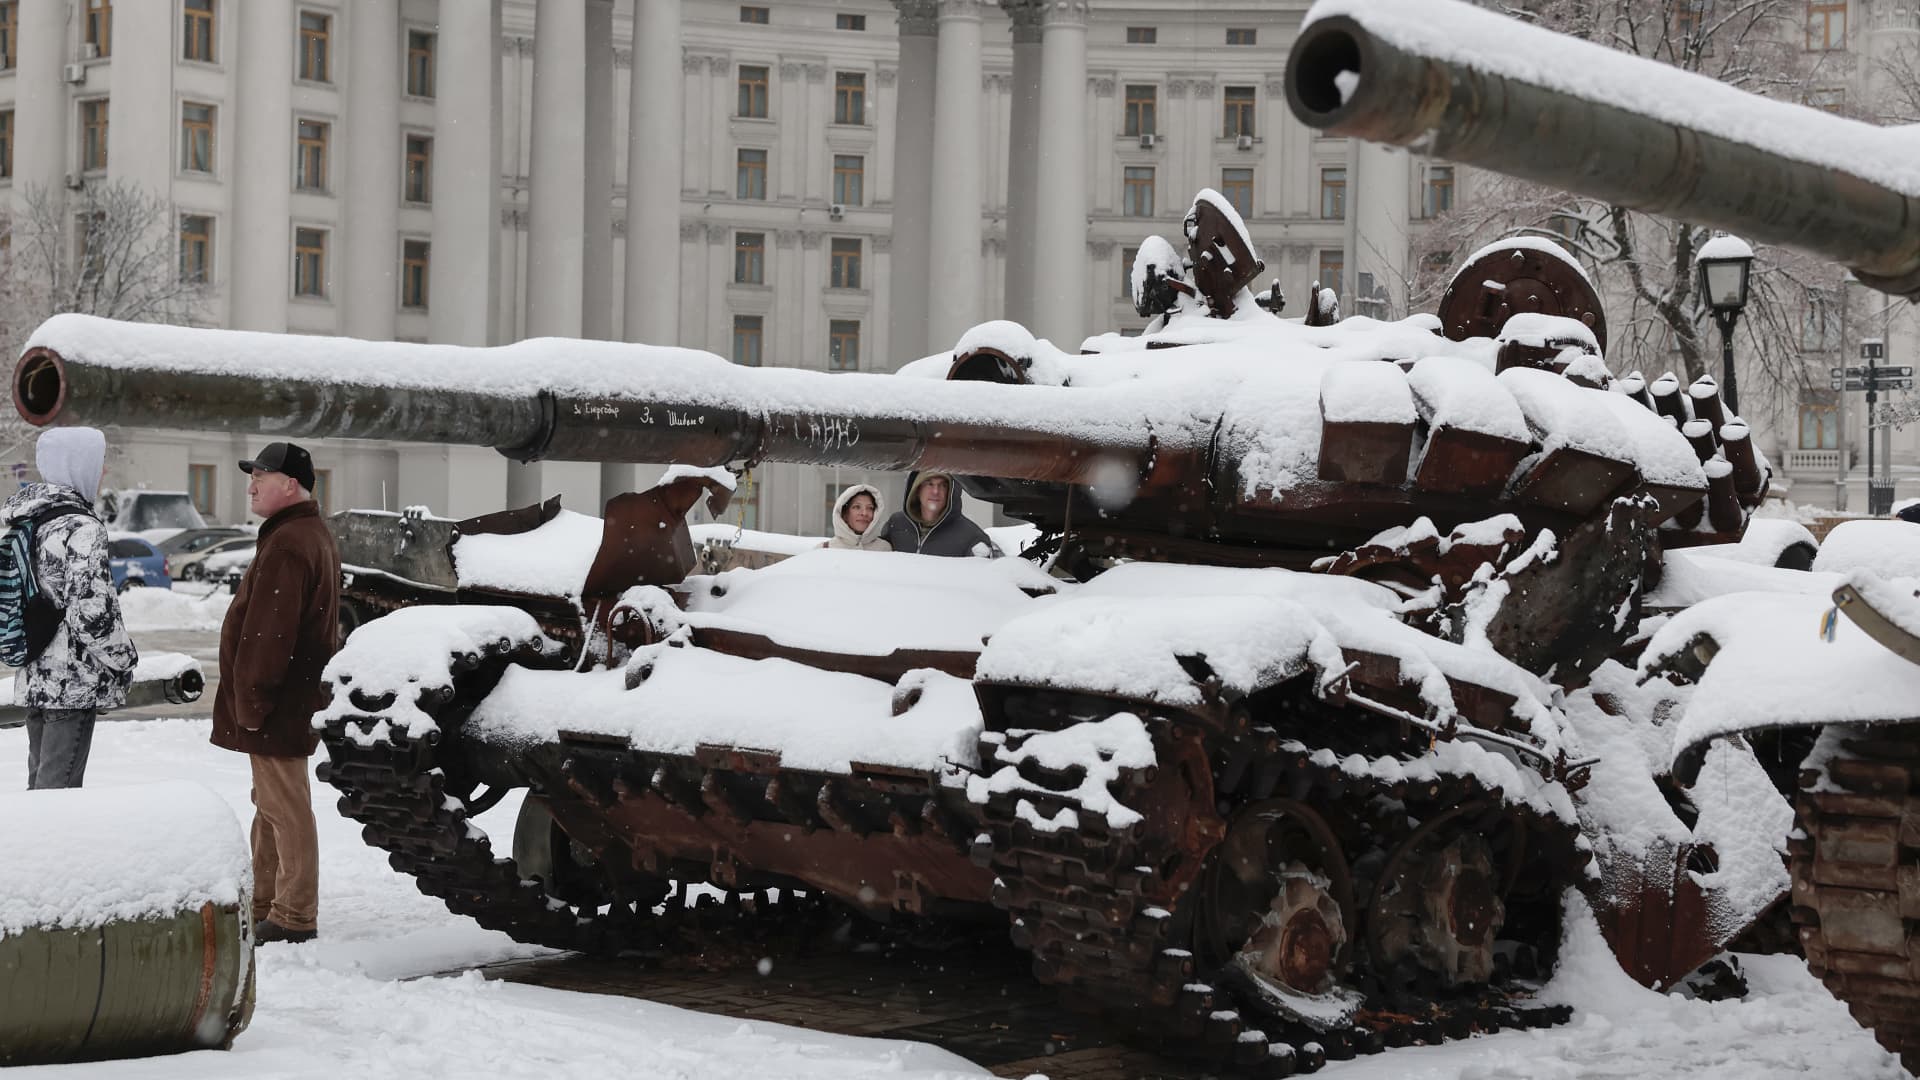 Destroyed Russian vehicles and tanks in Mykhailivska Square on Nov. 19, 2022, in Kyiv, Ukraine. Millions of Ukrainians are facing severe power disruptions after recent waves of Russian missile and drone strikes reportedly left almost half of Ukraine's energy infrastructure disabled and in need of repair, as temperatures plunge.